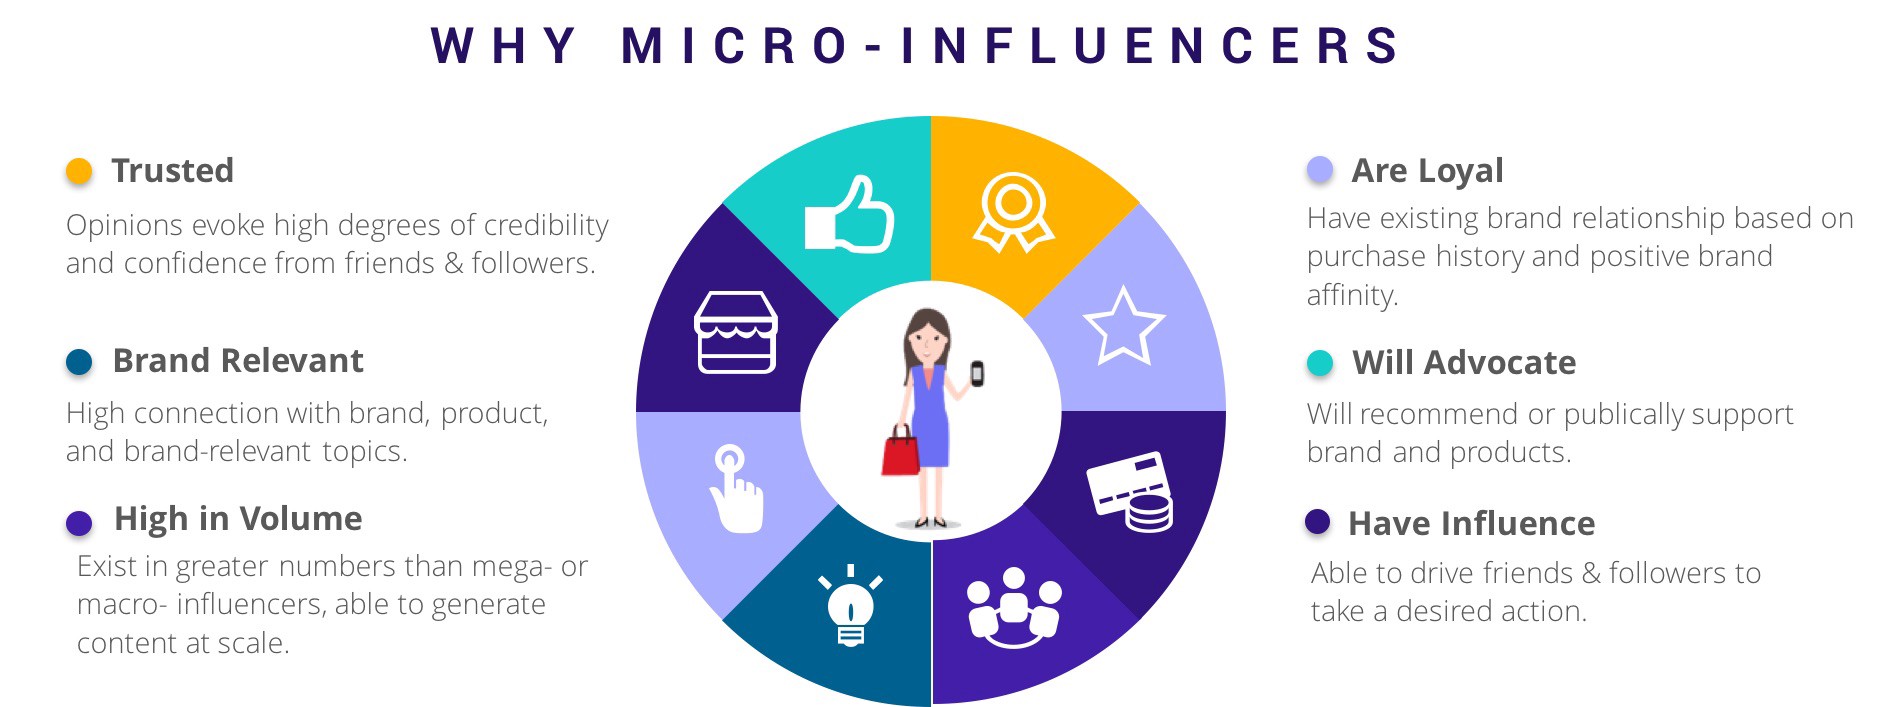 Why Micro Influencers work